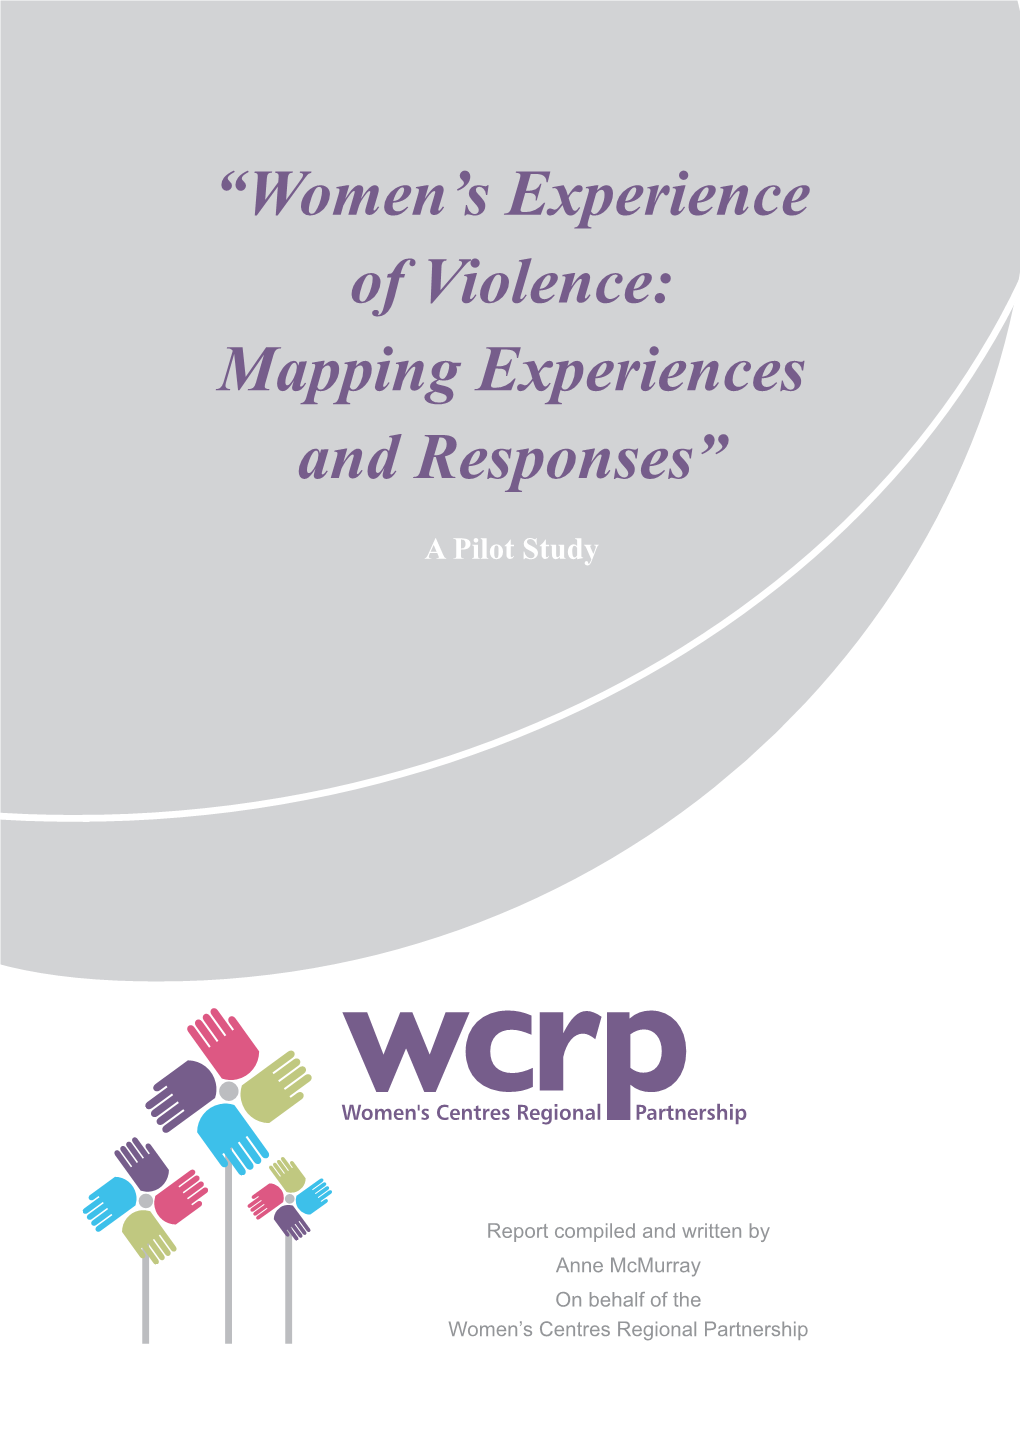 Women's Experience of Violence